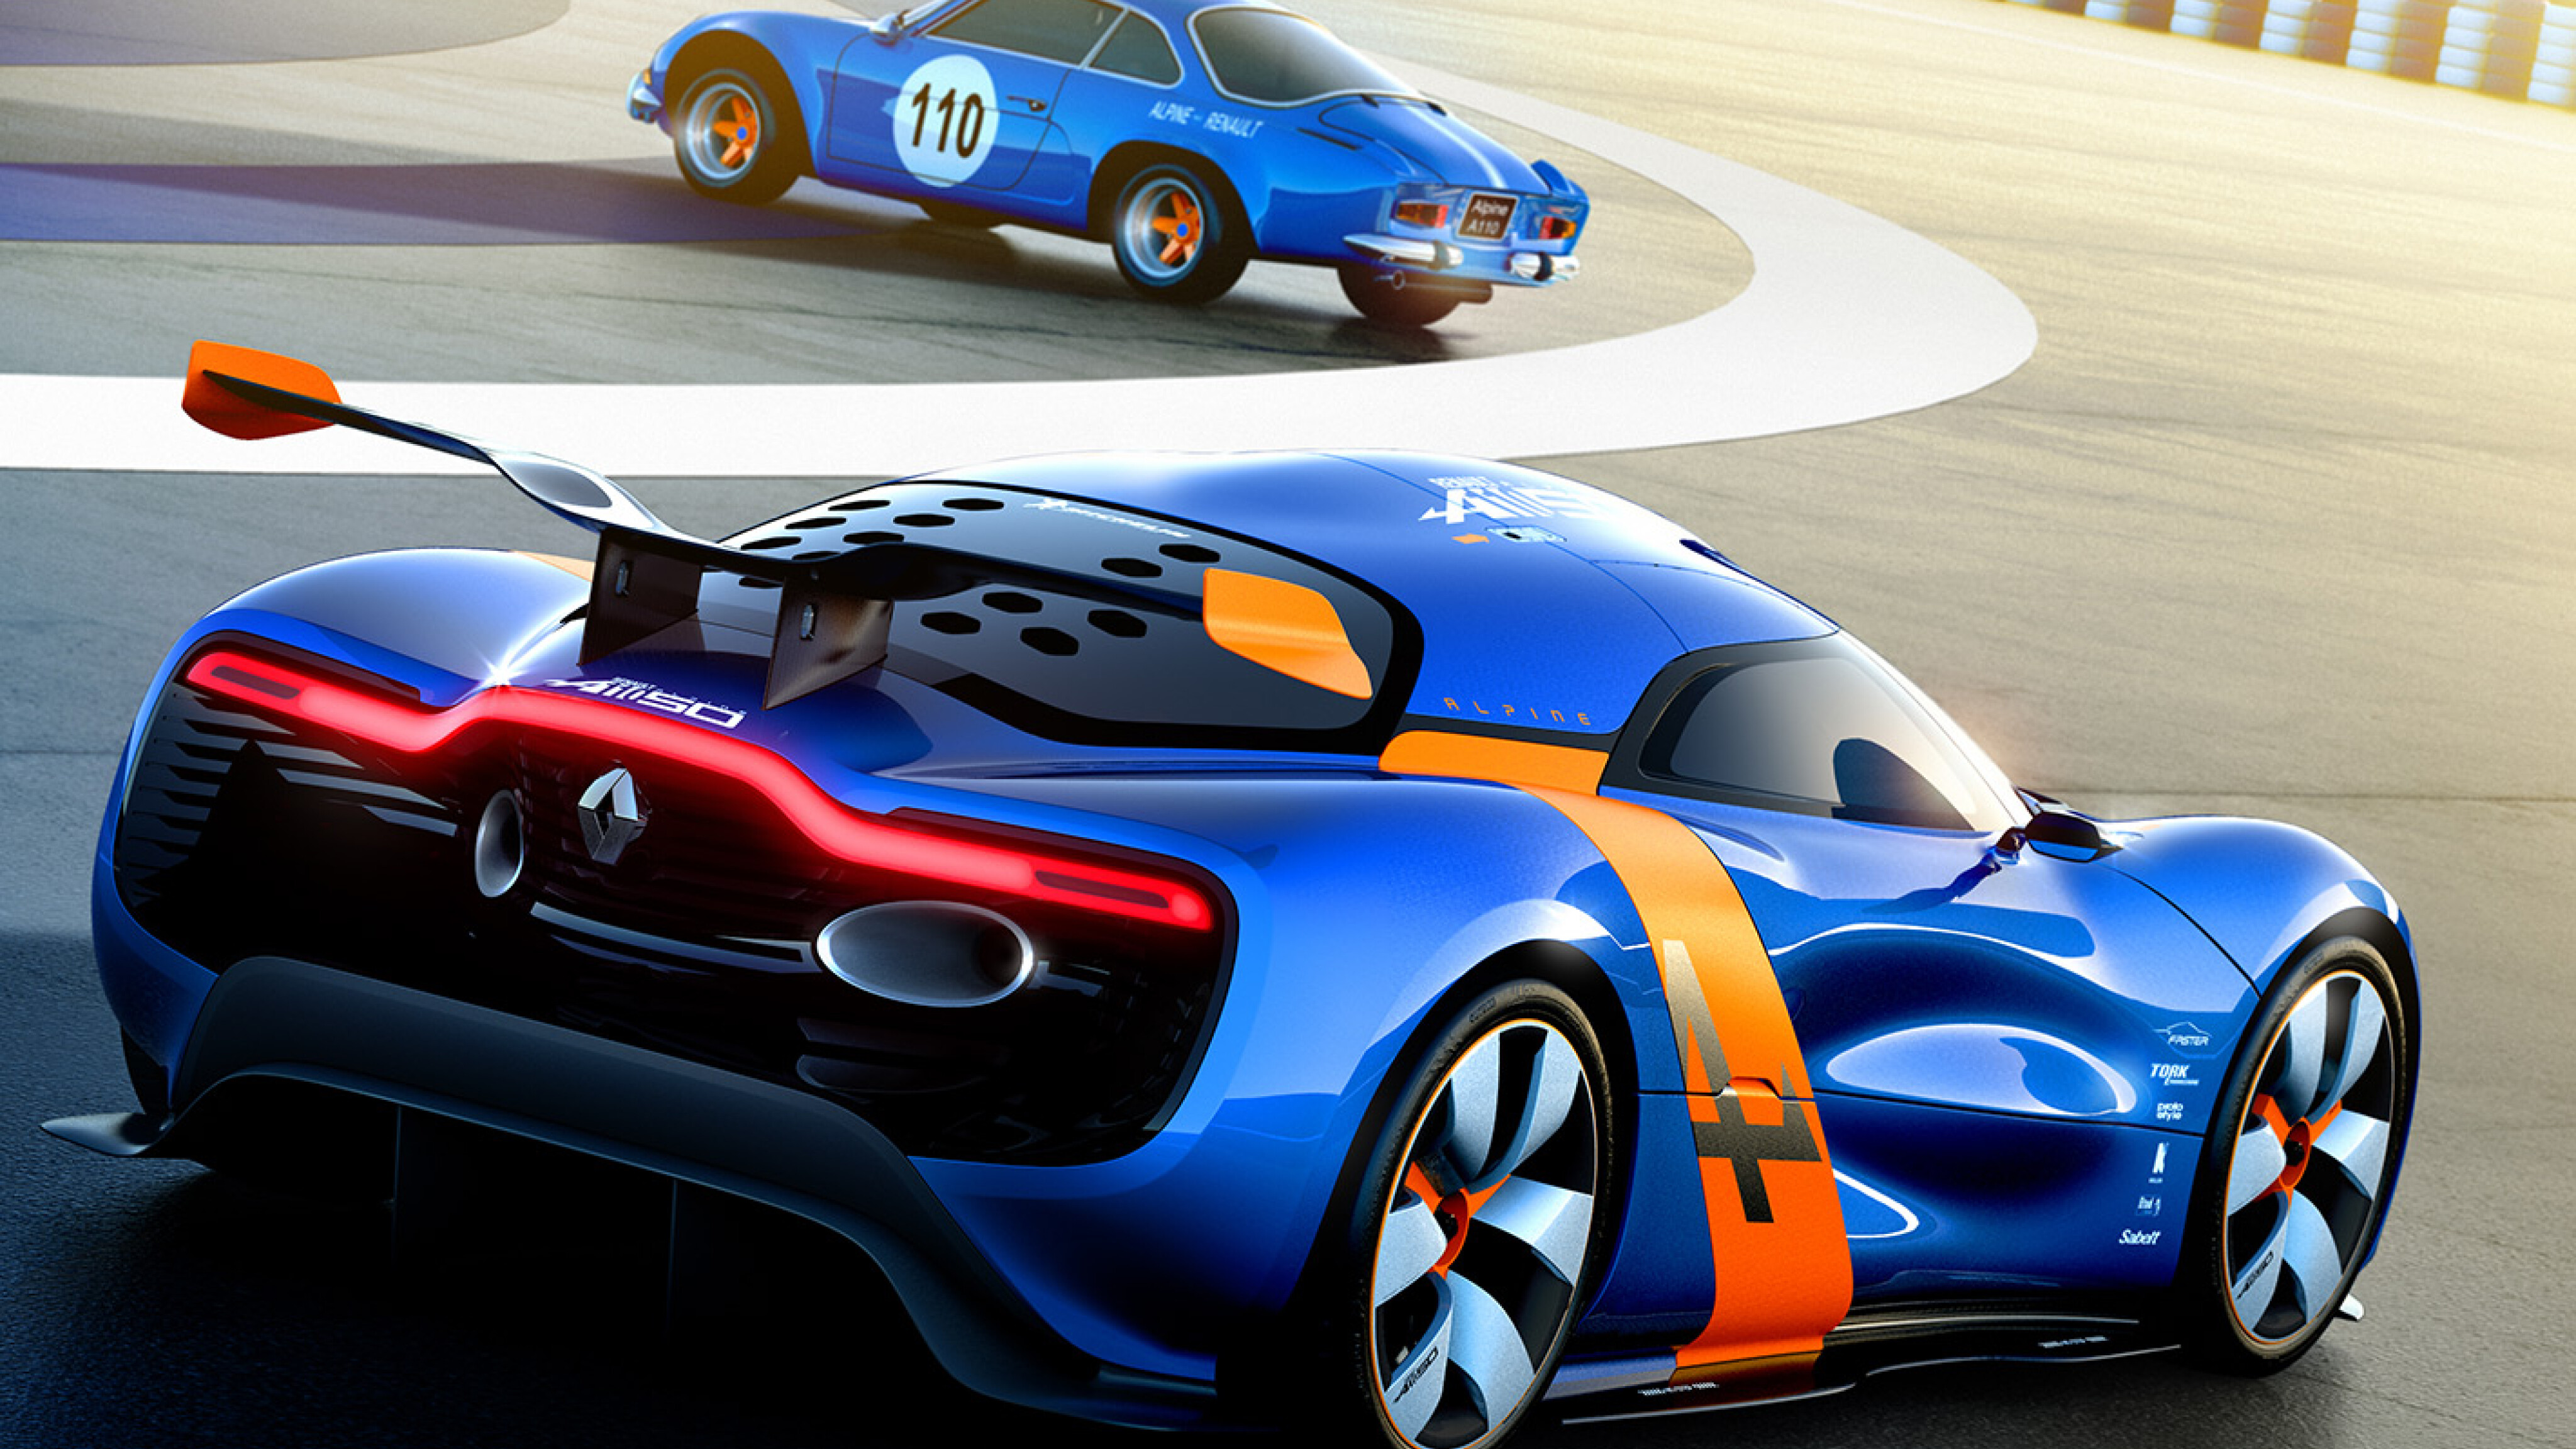 Renault's Alpine Sports Car Brand Is Working On Two Electric SUVs